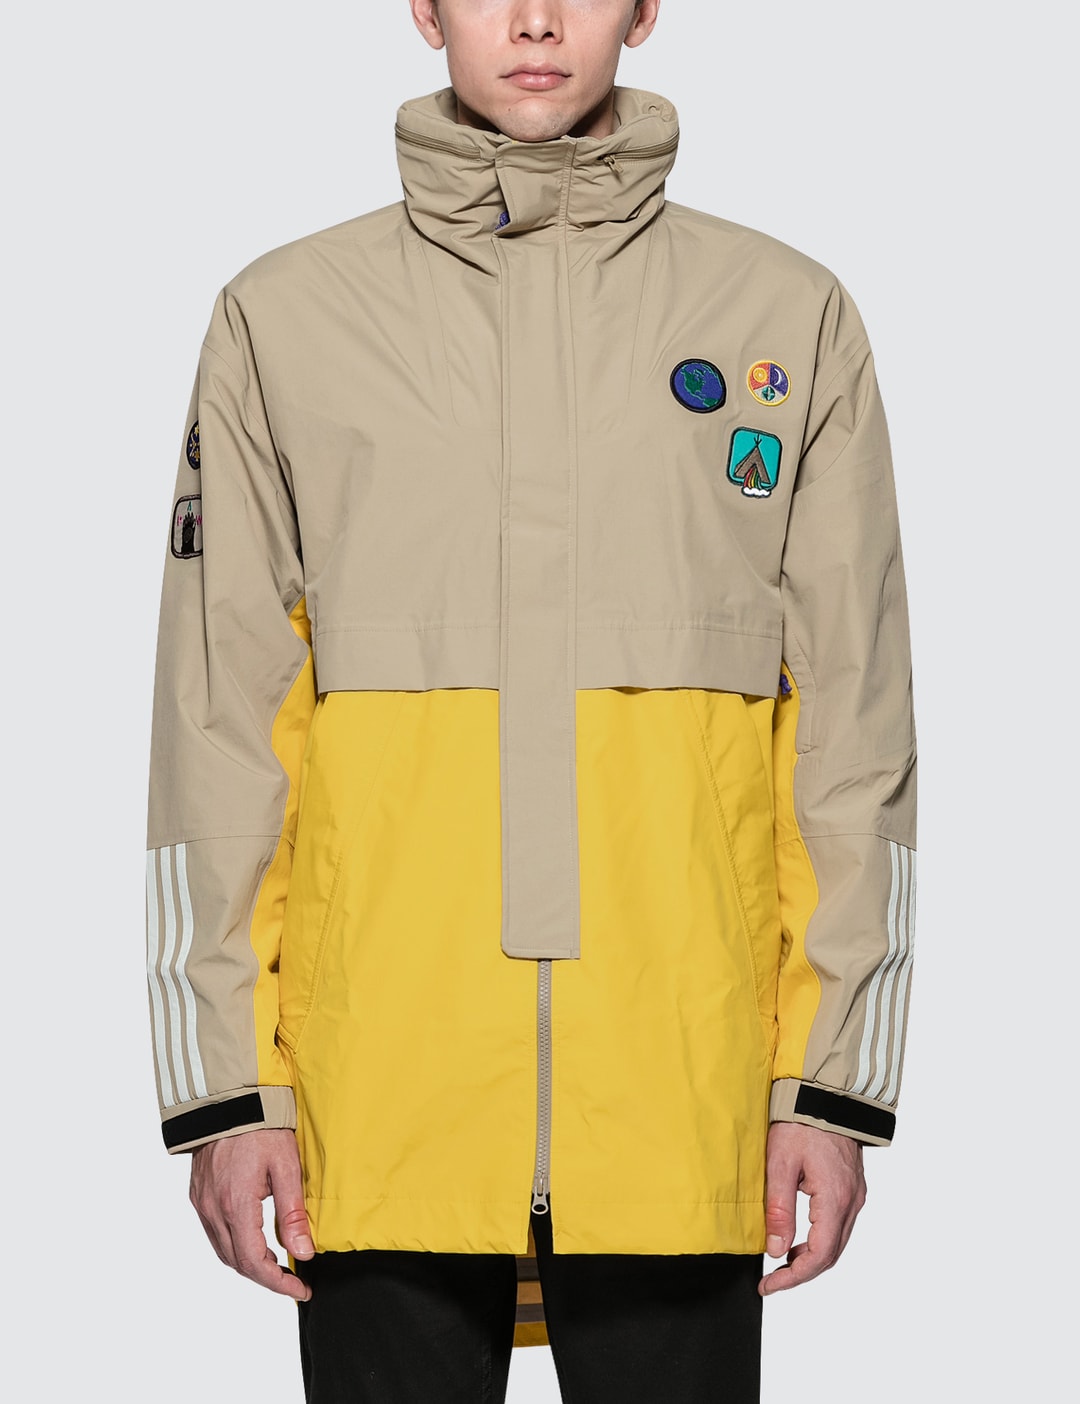 Toevlucht Tragisch Wonder Adidas Originals - Pharrell Williams x Adidas Human Race Hiking 3L Jacket |  HBX - Globally Curated Fashion and Lifestyle by Hypebeast